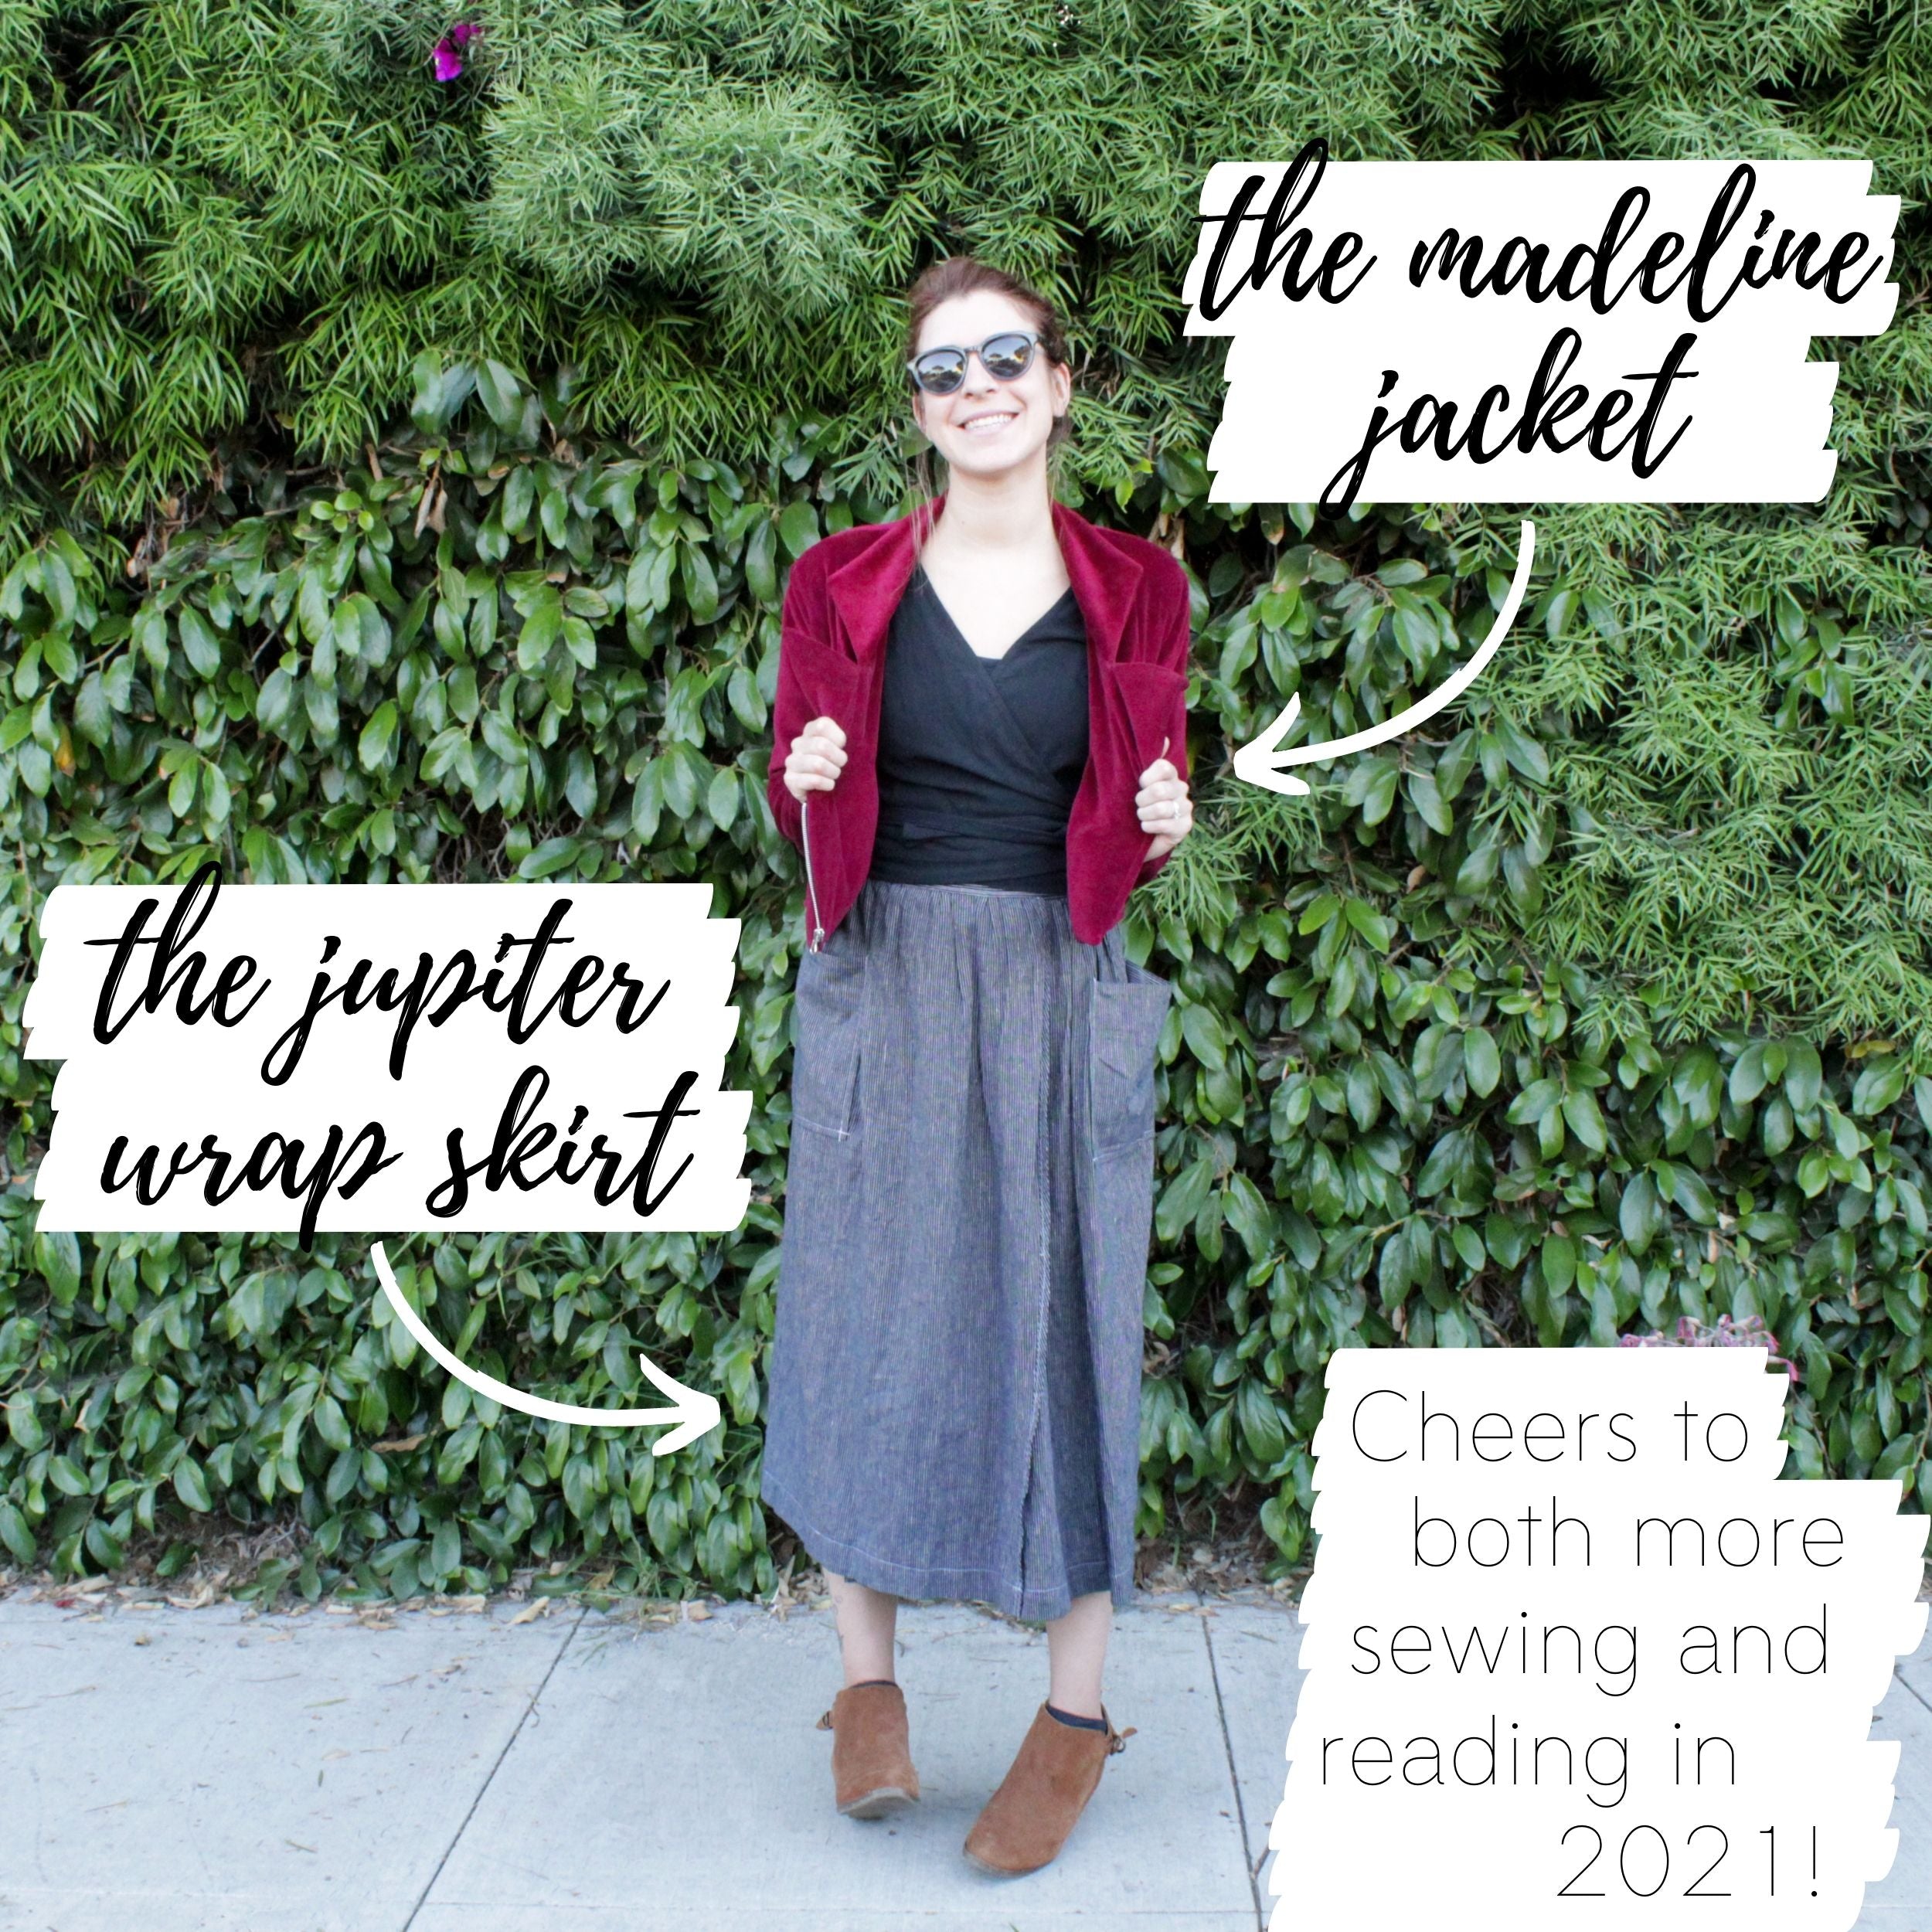 Favorite sewing projects of the year: Cheers to more sewing!